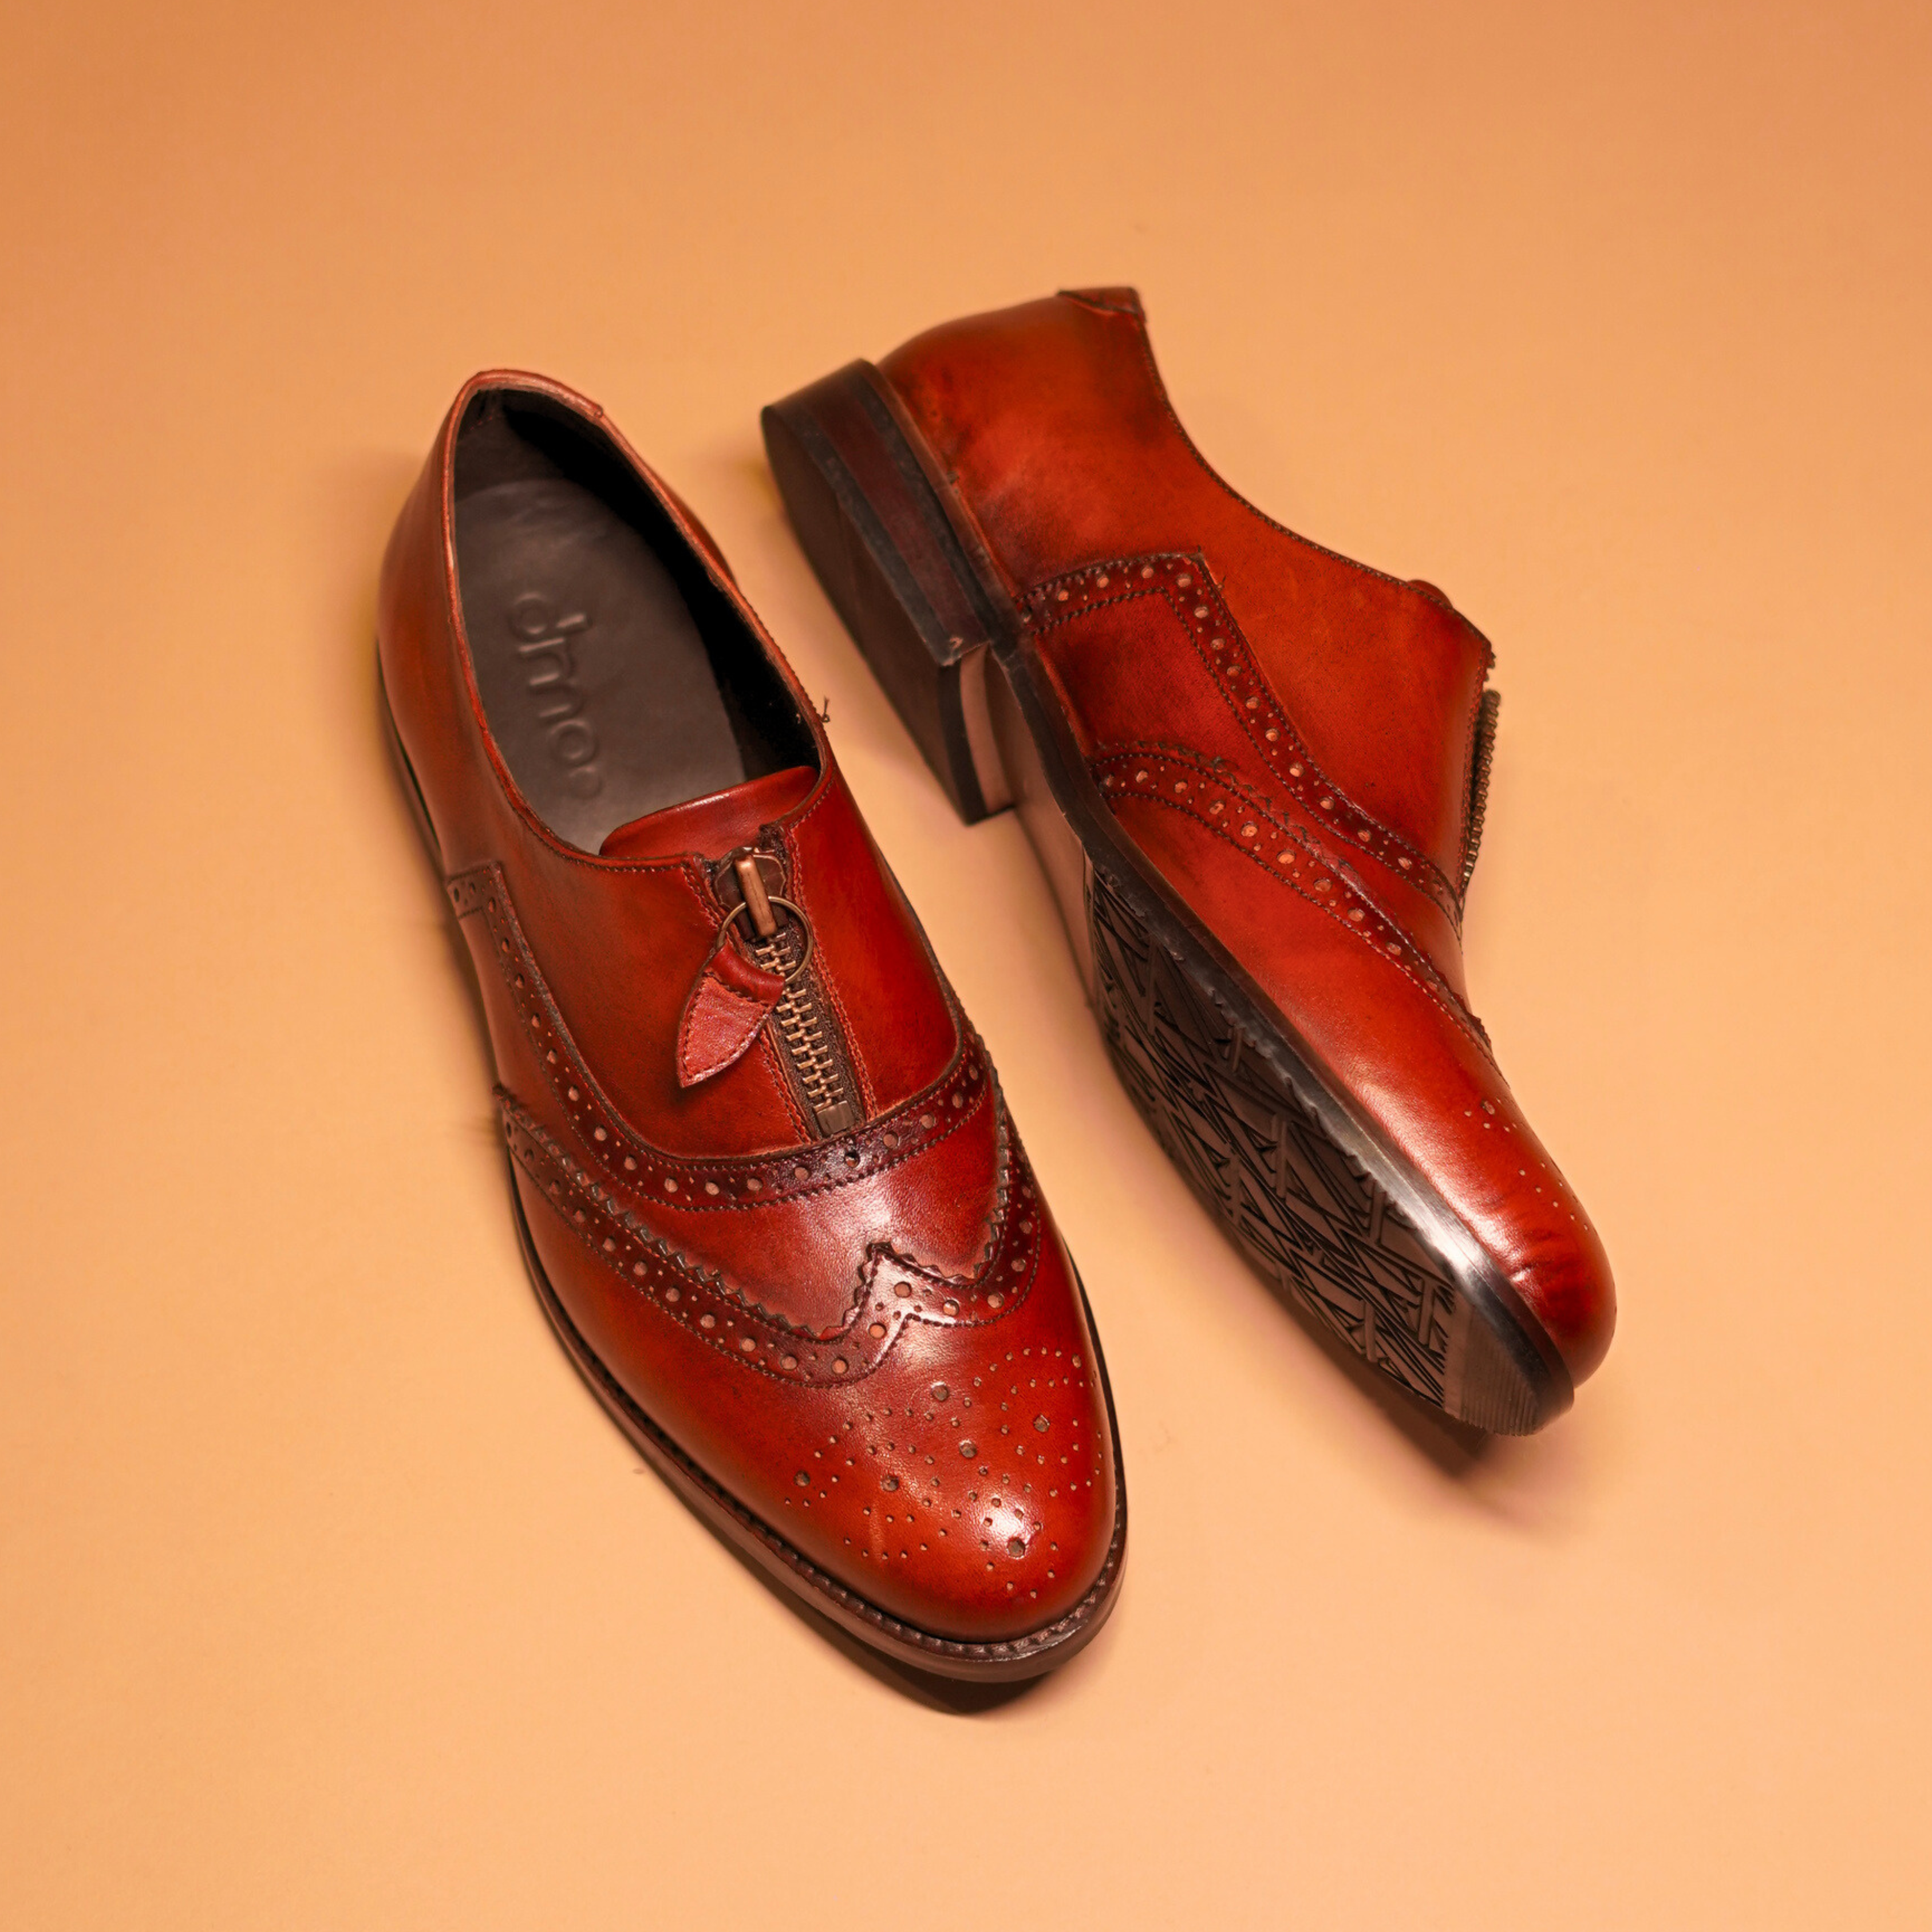 Bordo Leather Oxfords by dmodot with detailed wingtip captoe, intricate broguing, and unique central zip on rich dual-tone finish